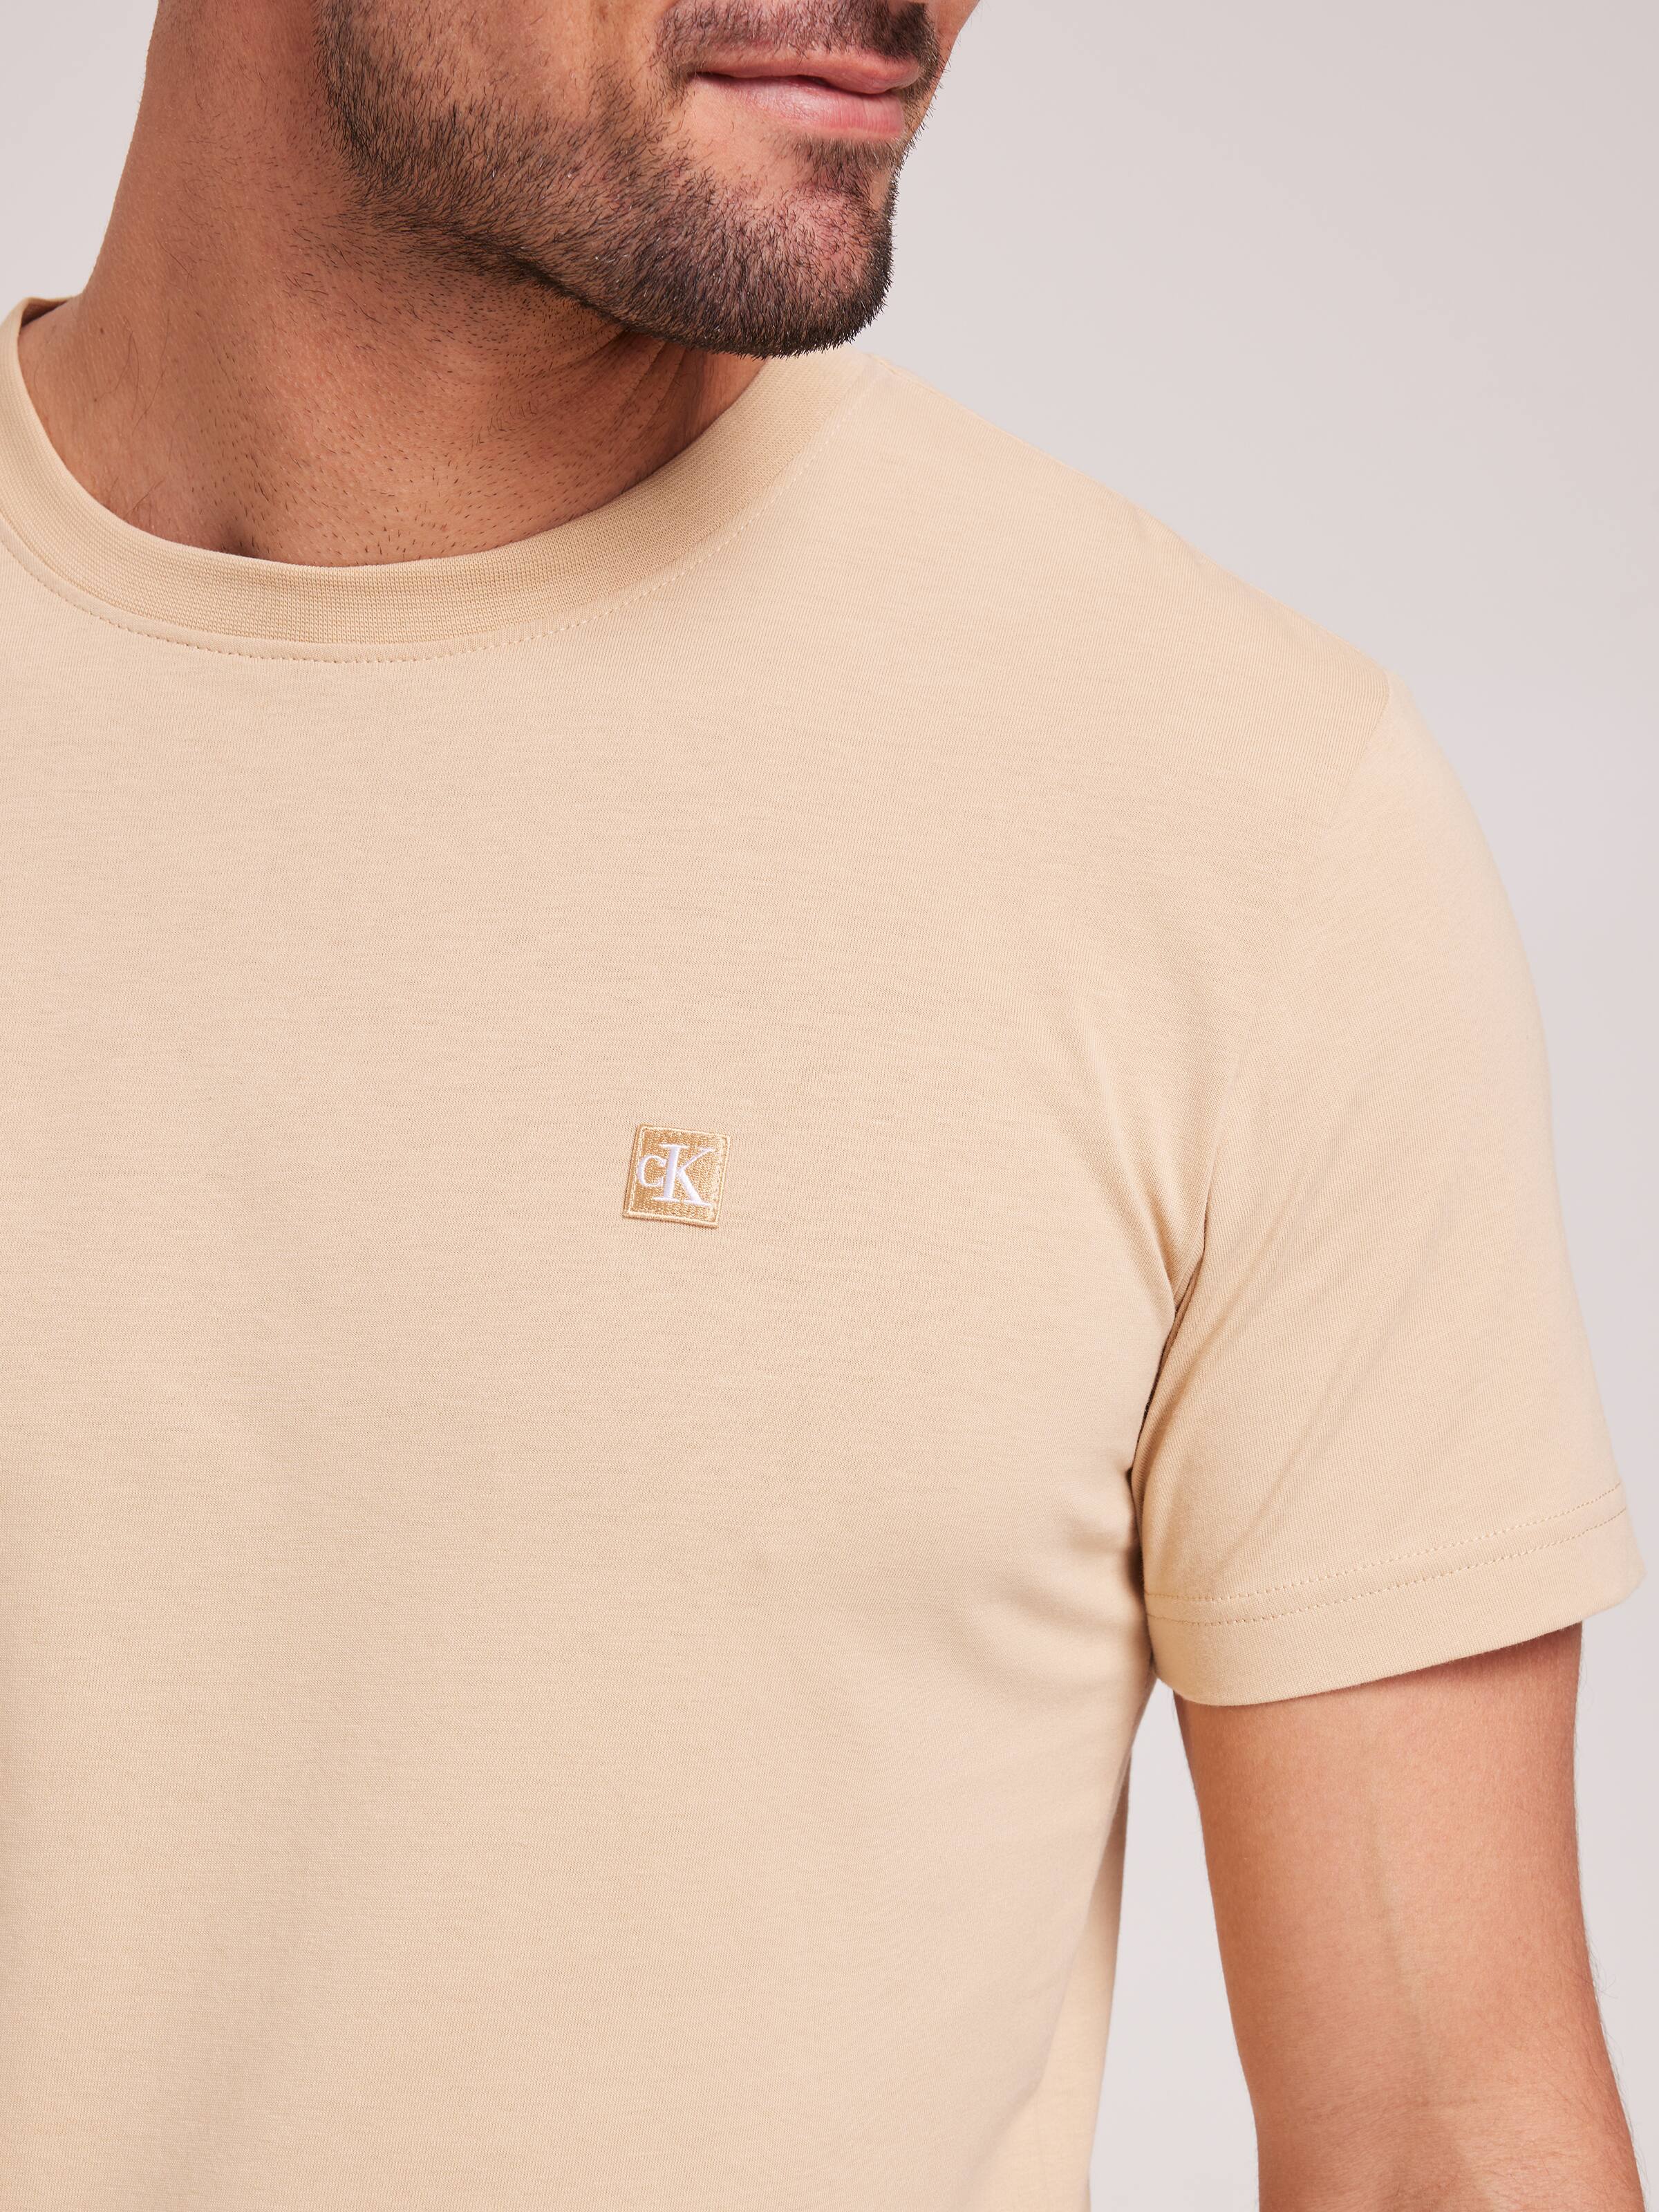 Embroidered Badge Tee In Warm Sand